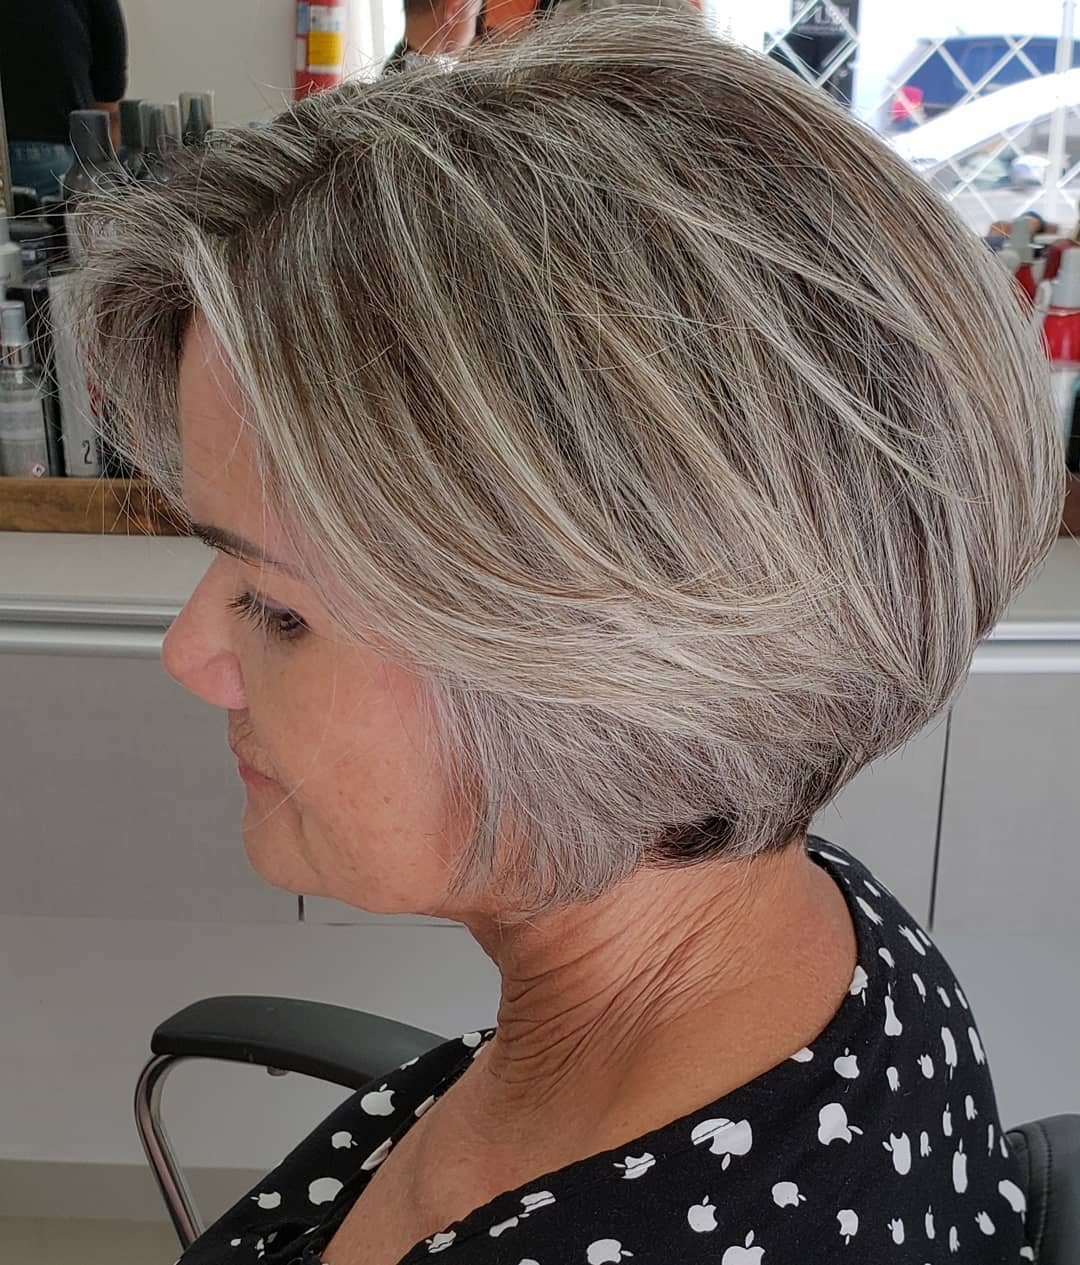 Textured and Layered Cut for Thick Hair